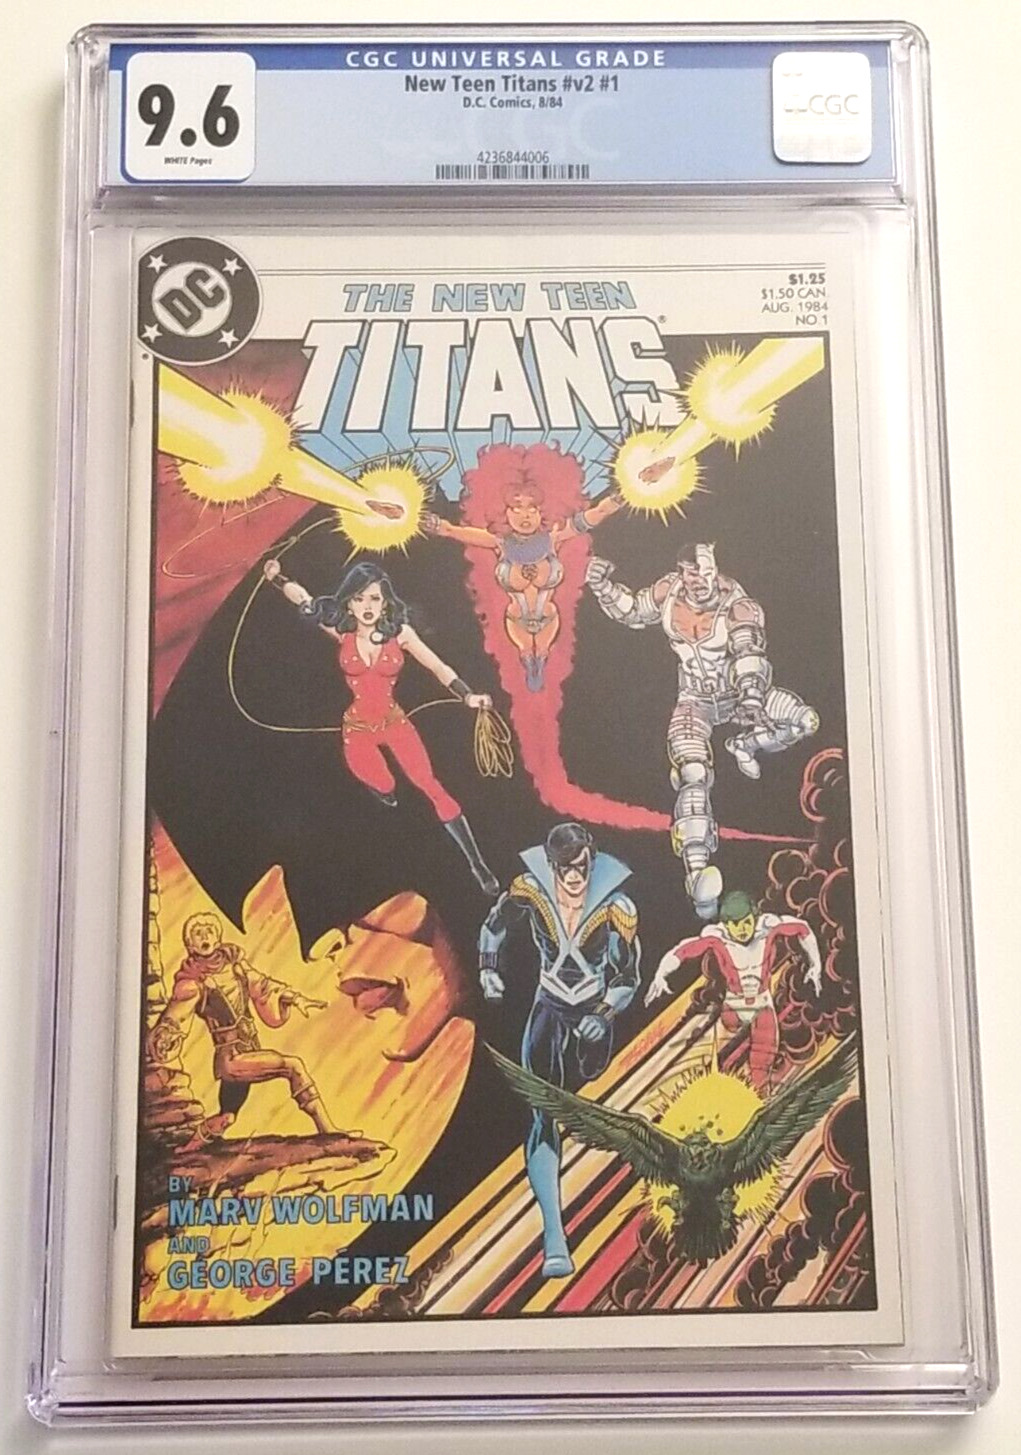 New Teen Titans New Titans #1, CGC 9.6 N Mint+, White Pages, 1984